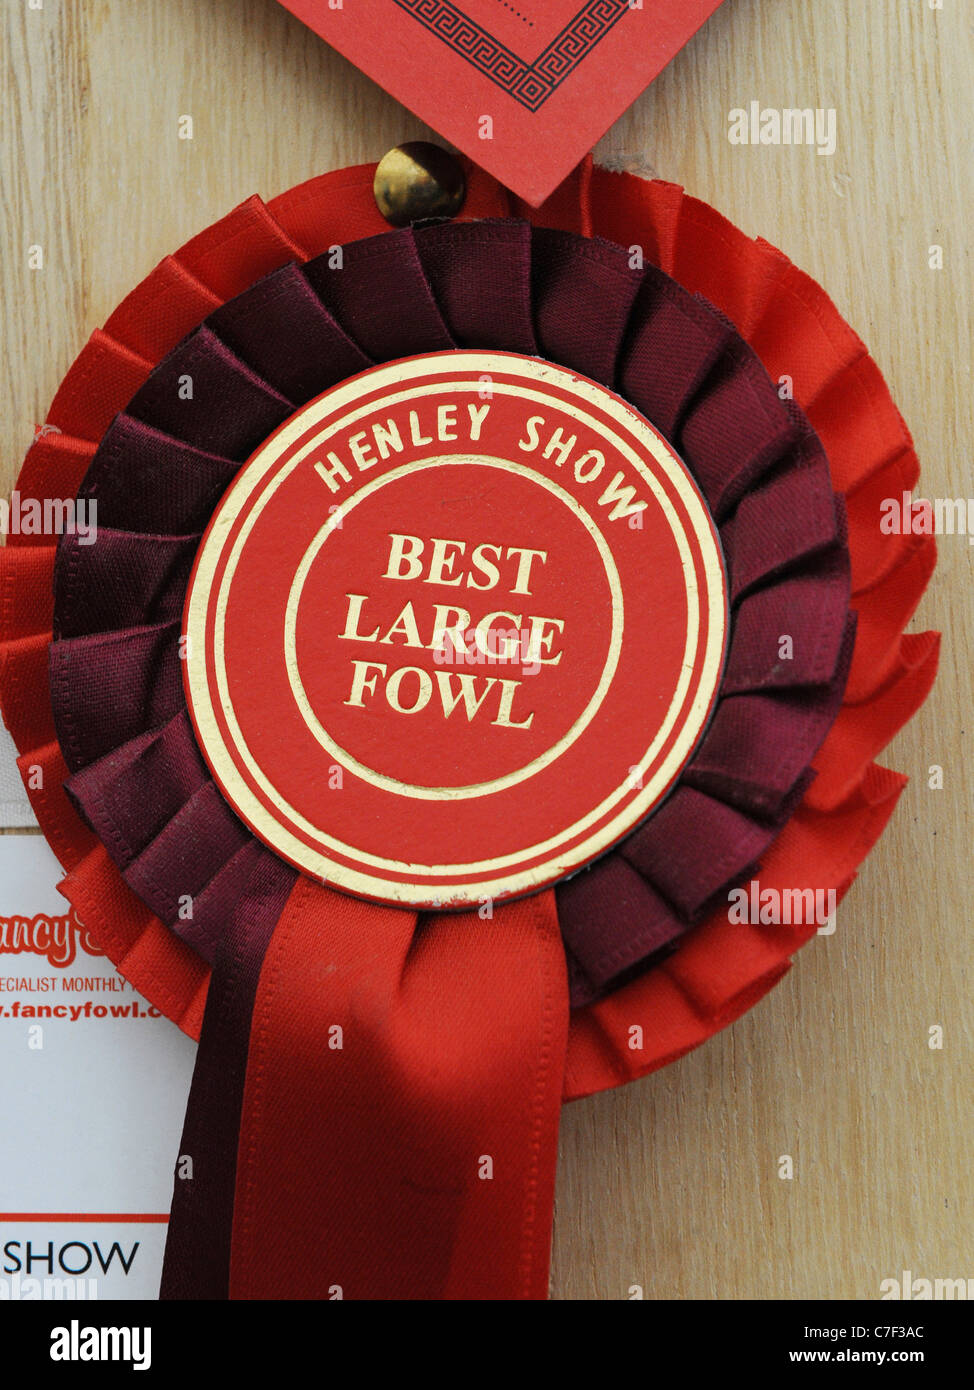 A rosette awarded to the best large fowl, at a country show Stock Photo